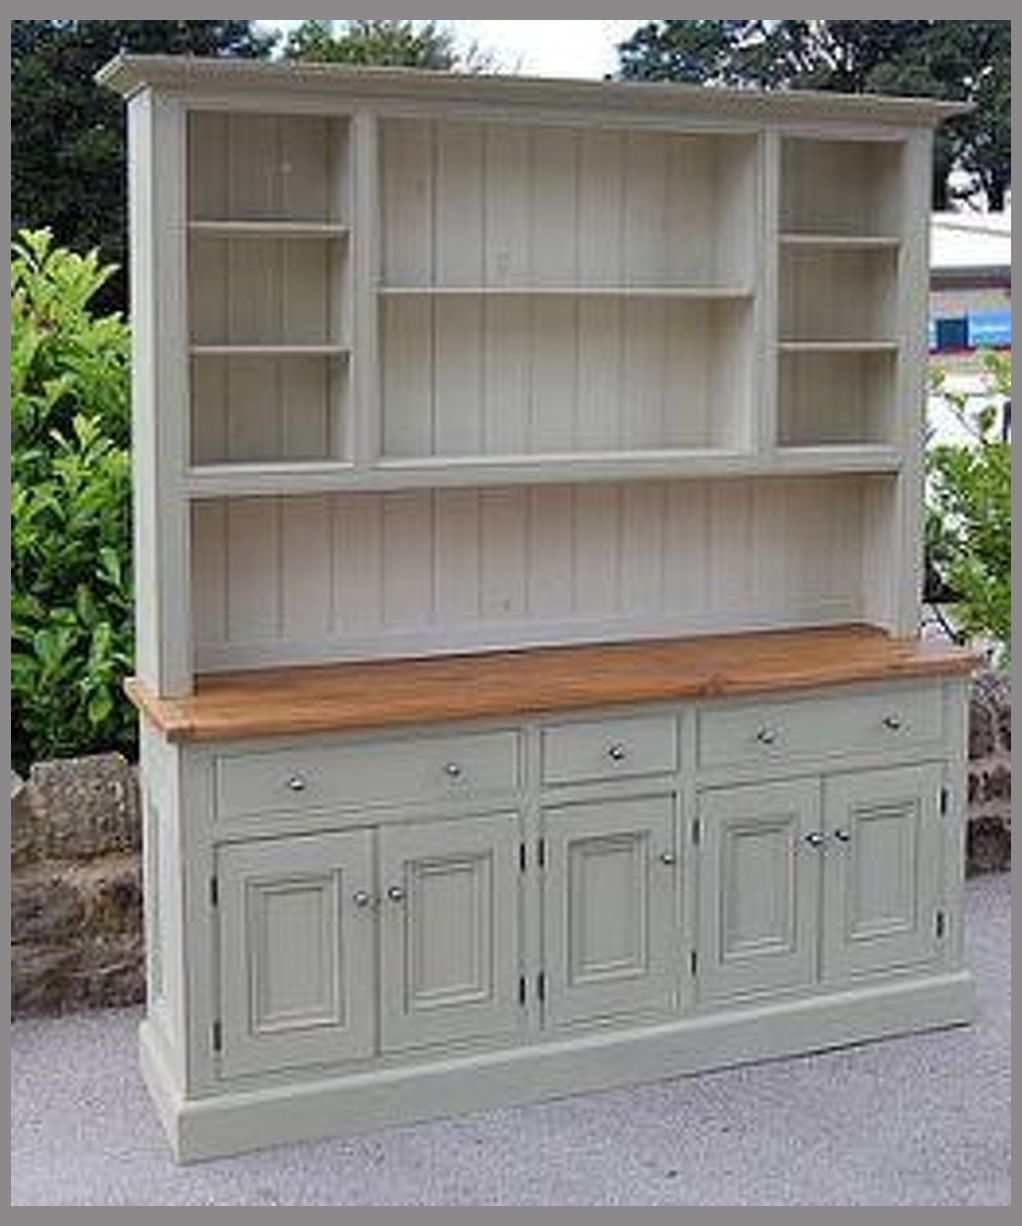 Beautiful dresser would look lovely in a country kitchen